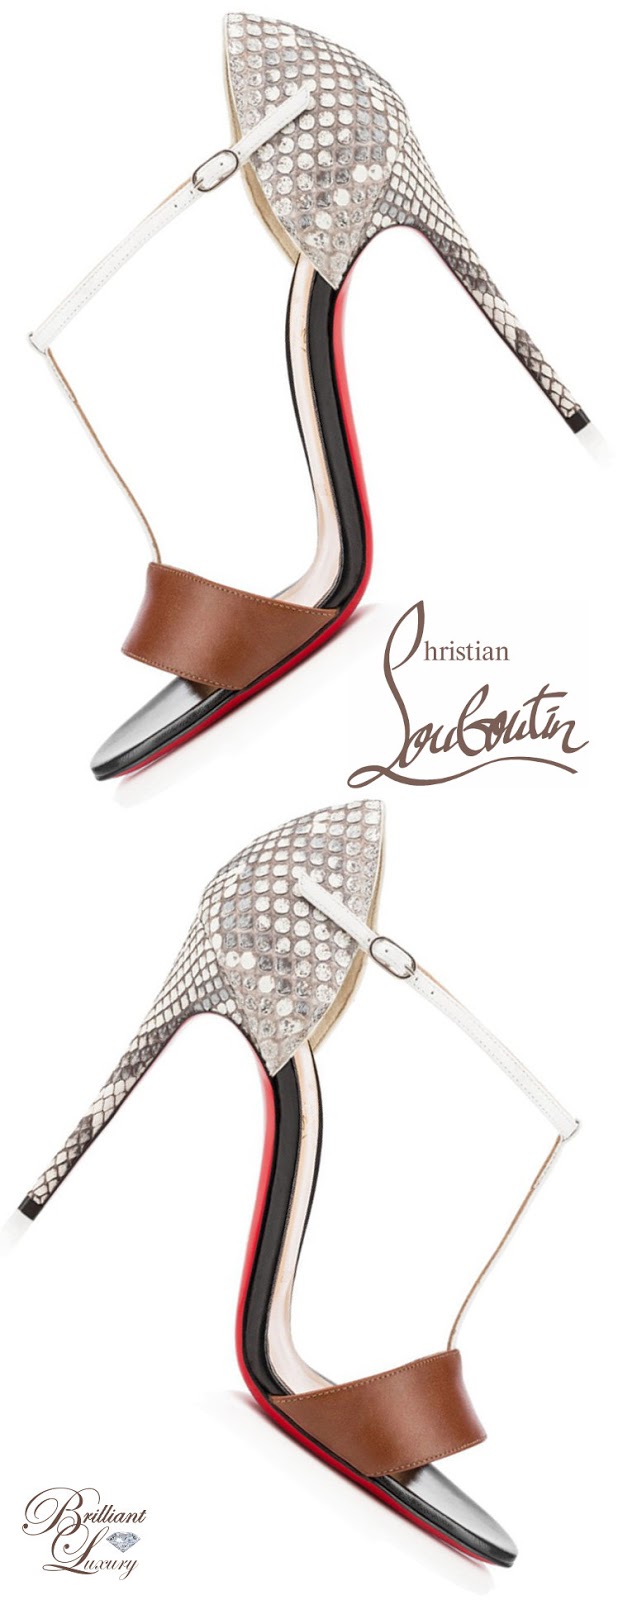 Brilliant Luxury: ♦Christian Louboutin Nude Collection